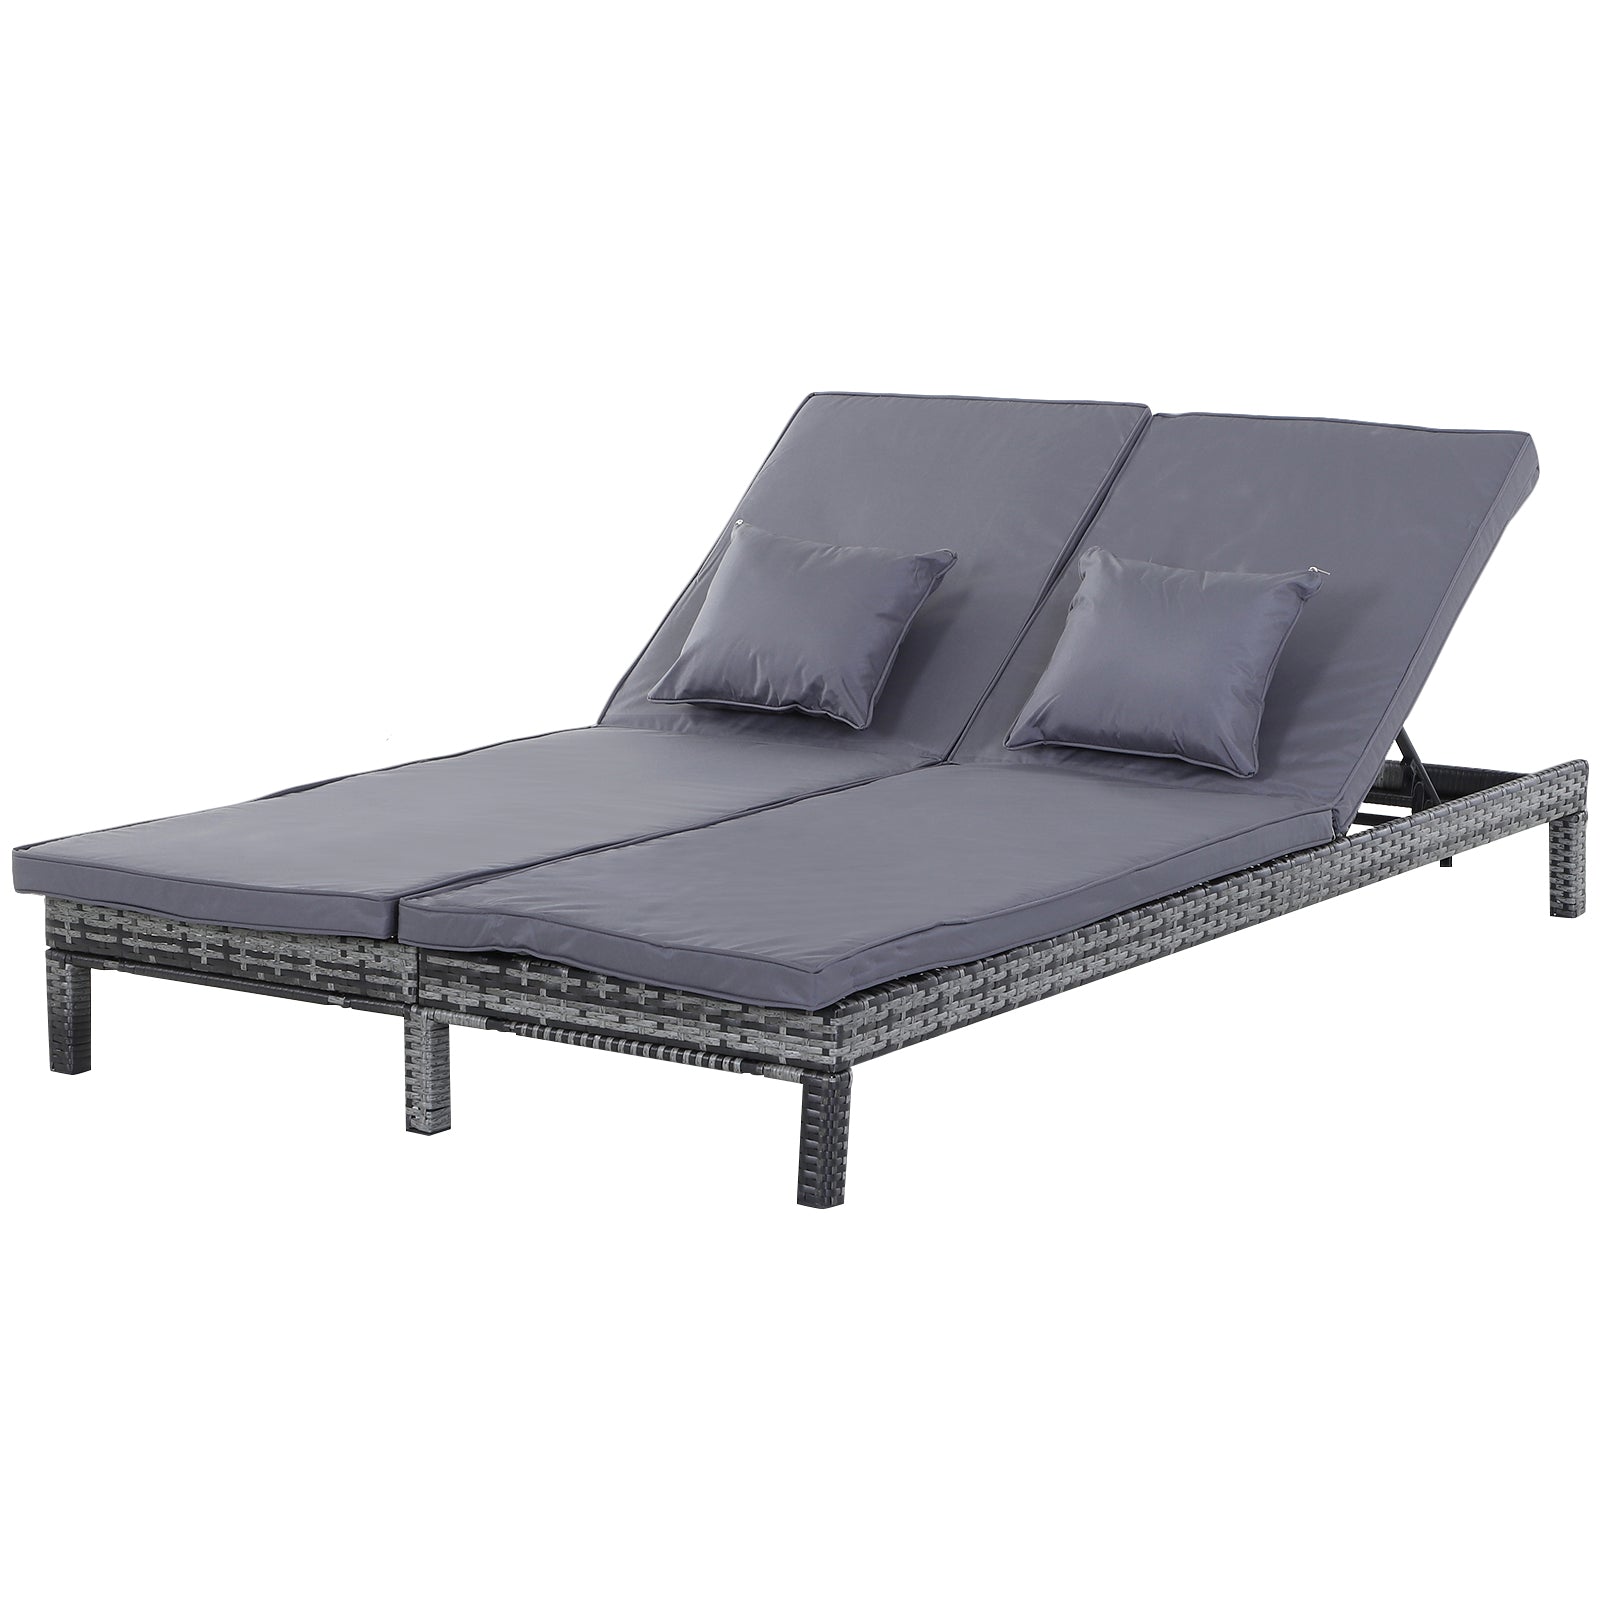 Outsunny 2 Person Rattan Lounger Adjustable Double Chaise Chair w/ Cushion Grey  | TJ Hughes